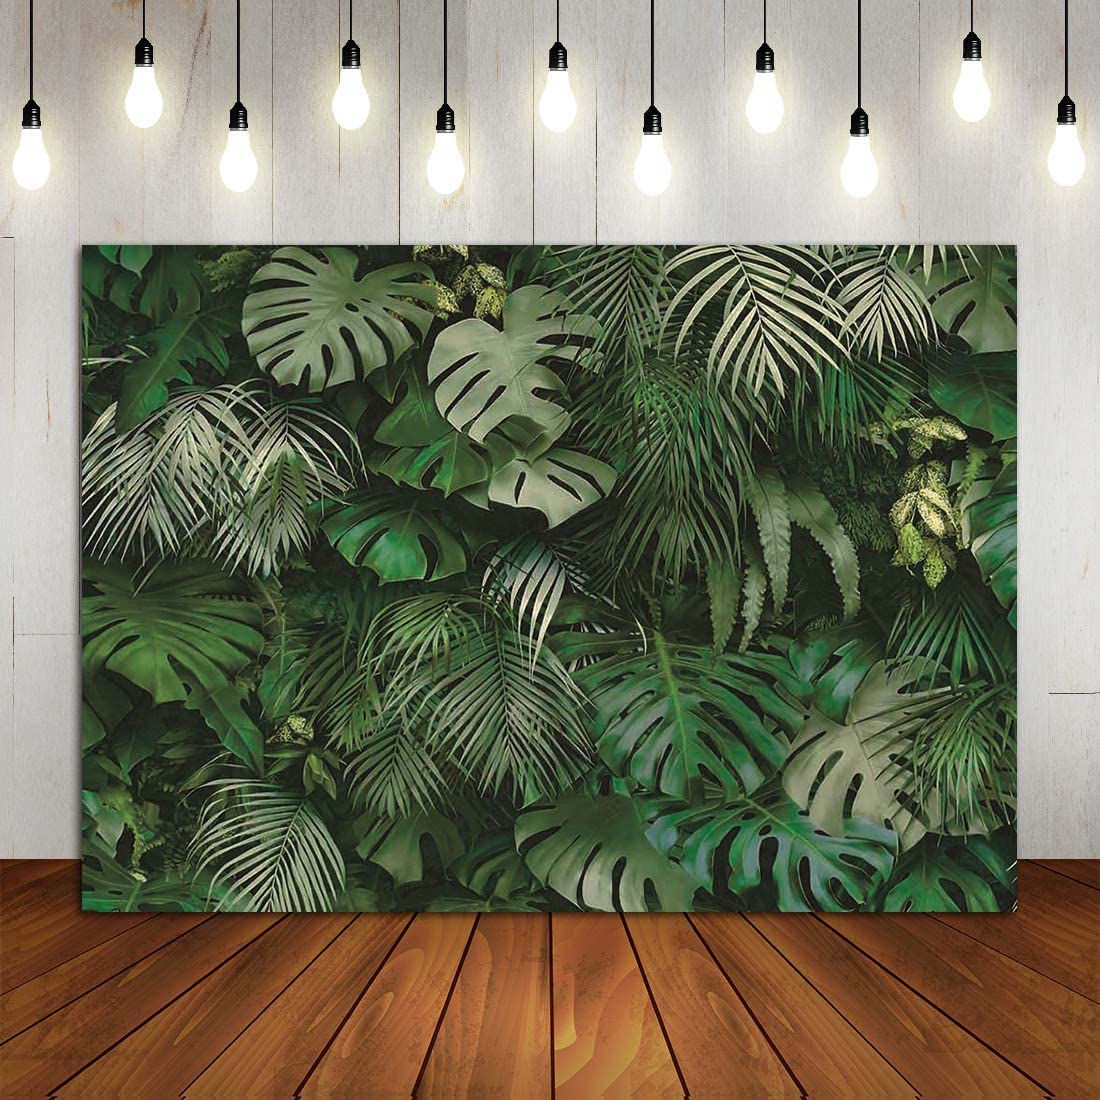 Yongqian Tropical Green Leaves Photography Backdrops Nature Safari Party Decoration Outdoorsy Newborn Baby Shower Backdrop Wedding Bridal Shower Birthday Photo Background Studio Props 7x5ft